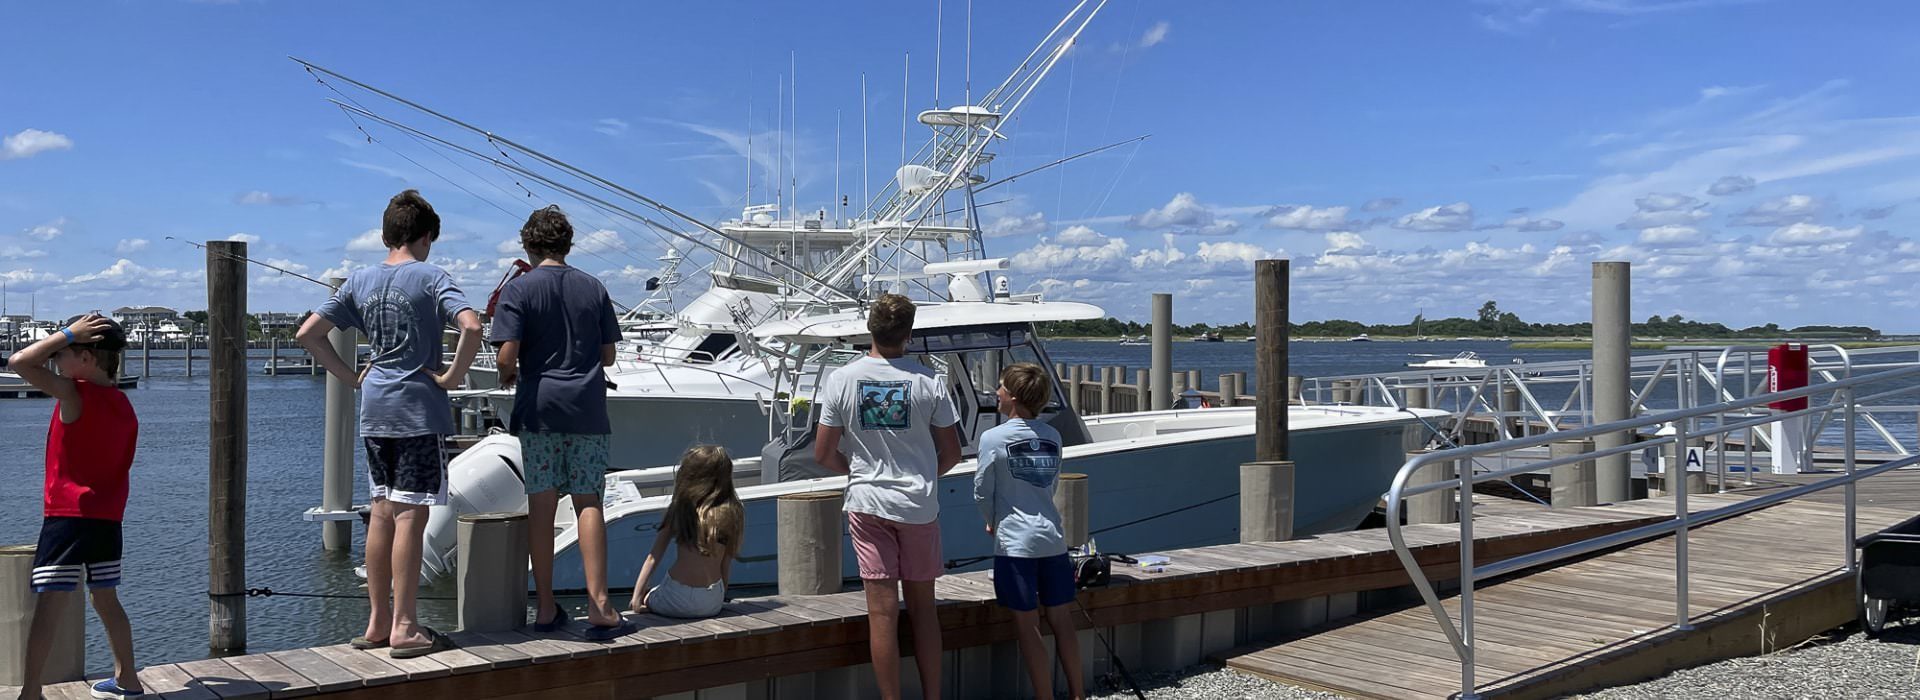 Handful of kids standing on a dock looking at boats in the harbor